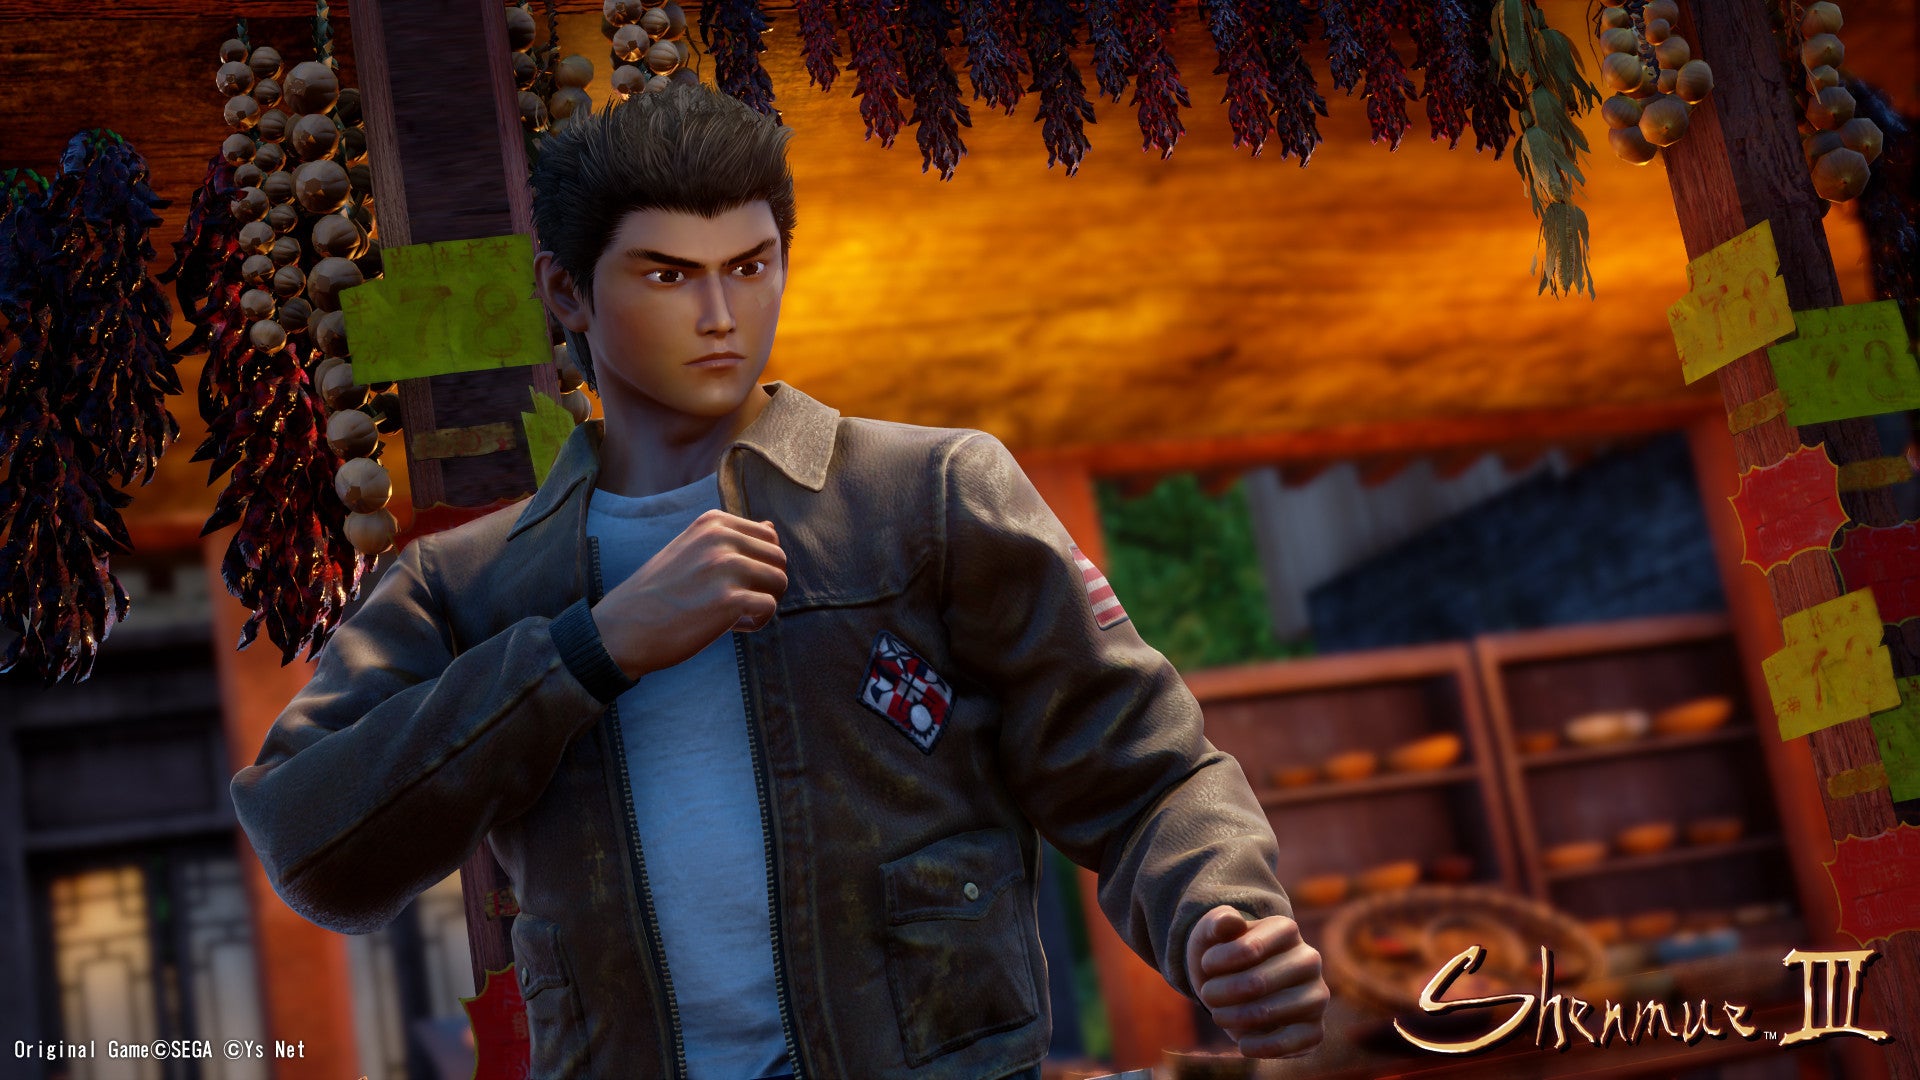 Image for We spoke to Shenmue 3's Yu Suzuki about inventing the open world genre, dead-eyed characters and Shenmue 4